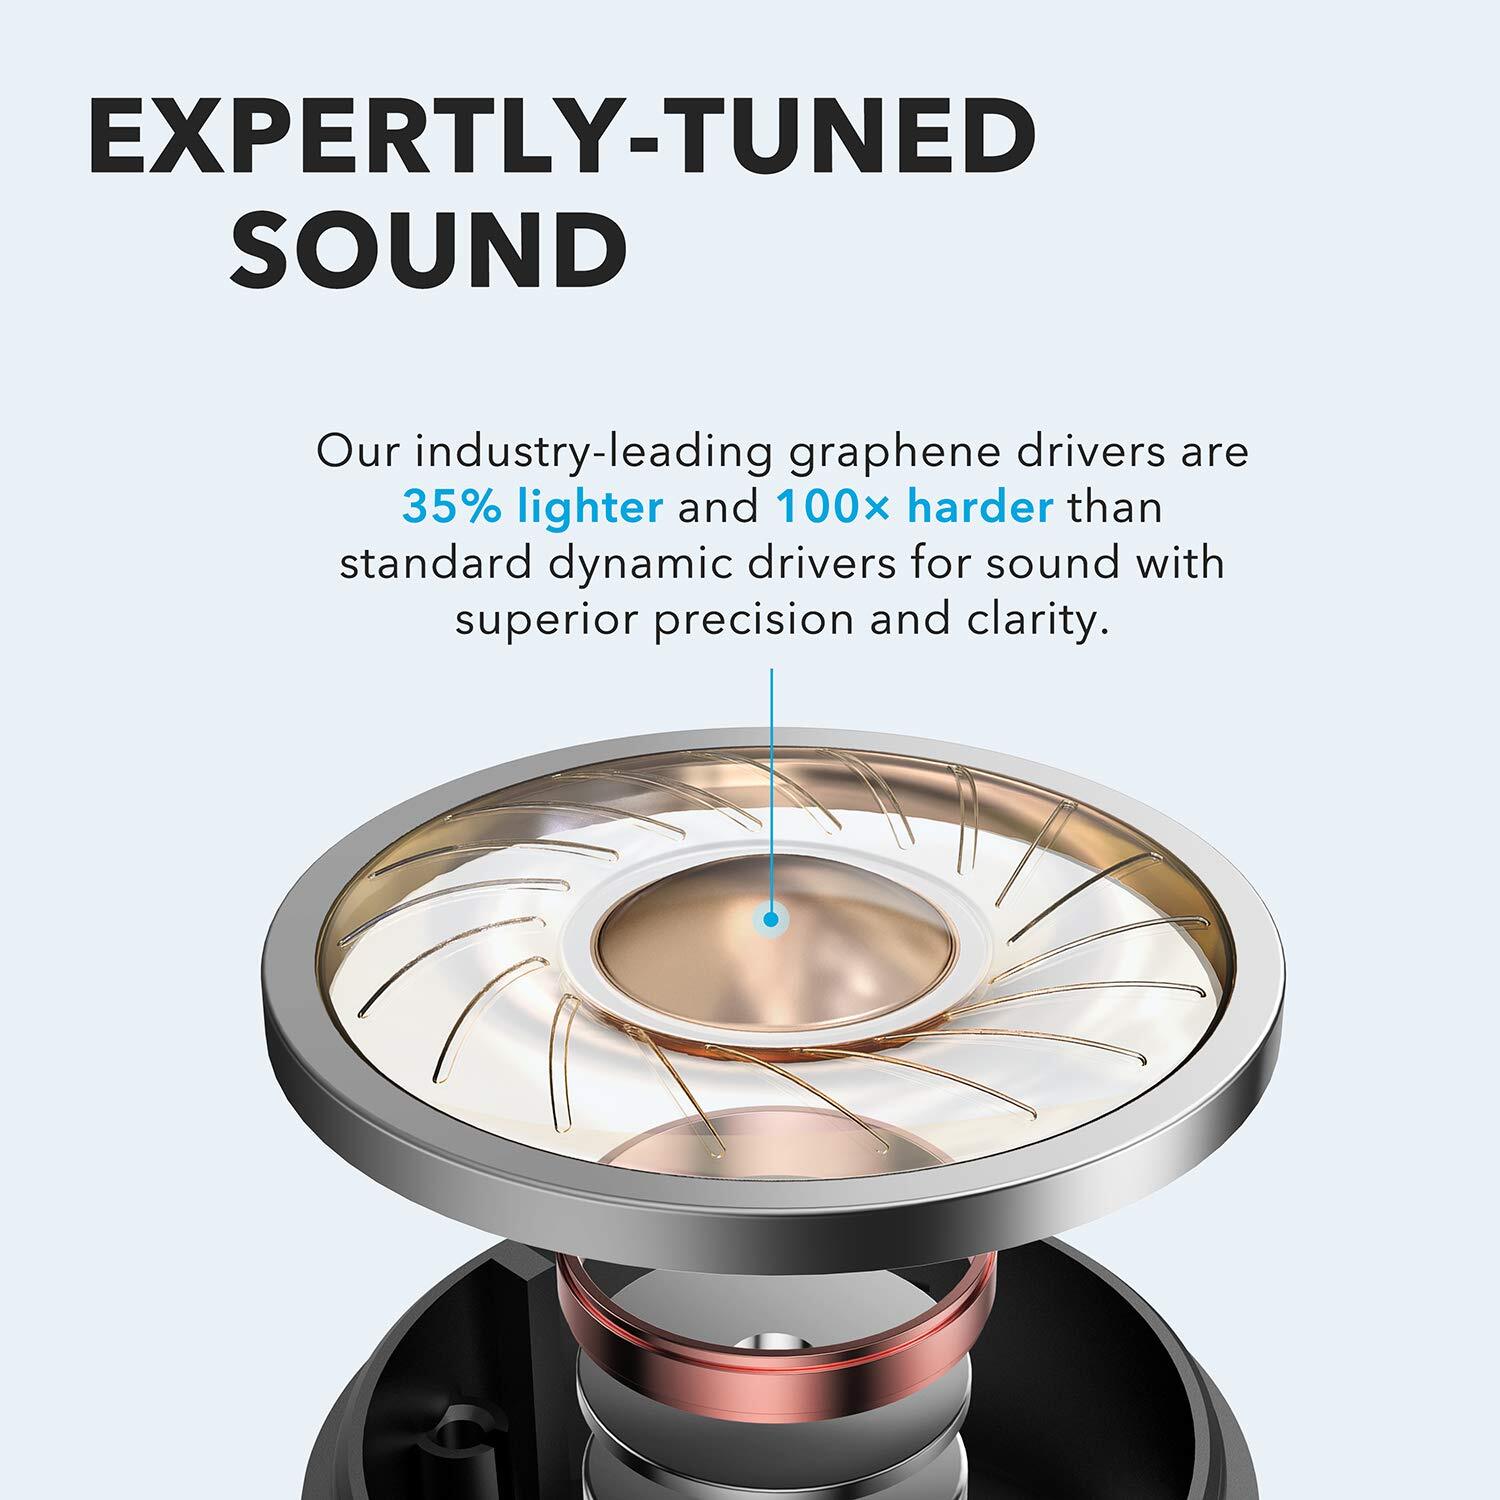 Soundcore Anker Life P2 Wireless Earbuds with 4 Microphones, cVc 8.0 Noise Reduction, Graphene Drivers for Clear Sound, USB C, Waterproof, Wireless Earphones-M000000000465 www.mysocially.com